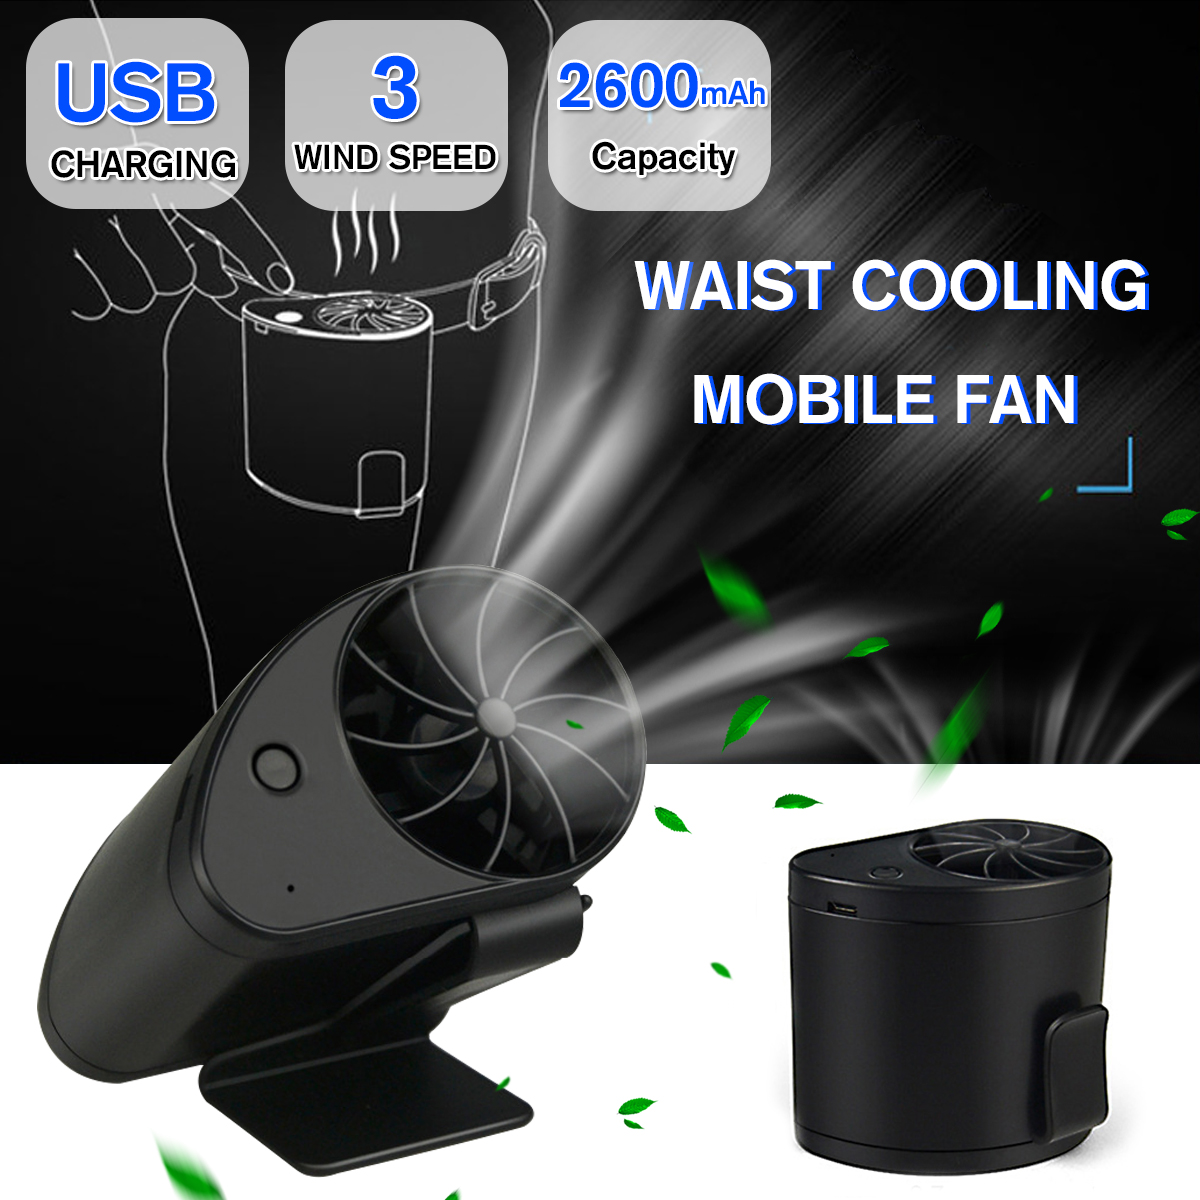 Hands-free-Waist-Hanging-Fan-USB-Rechargeable-Outdoor-Air-Conditioner-Cooler-Fan-1493001-2